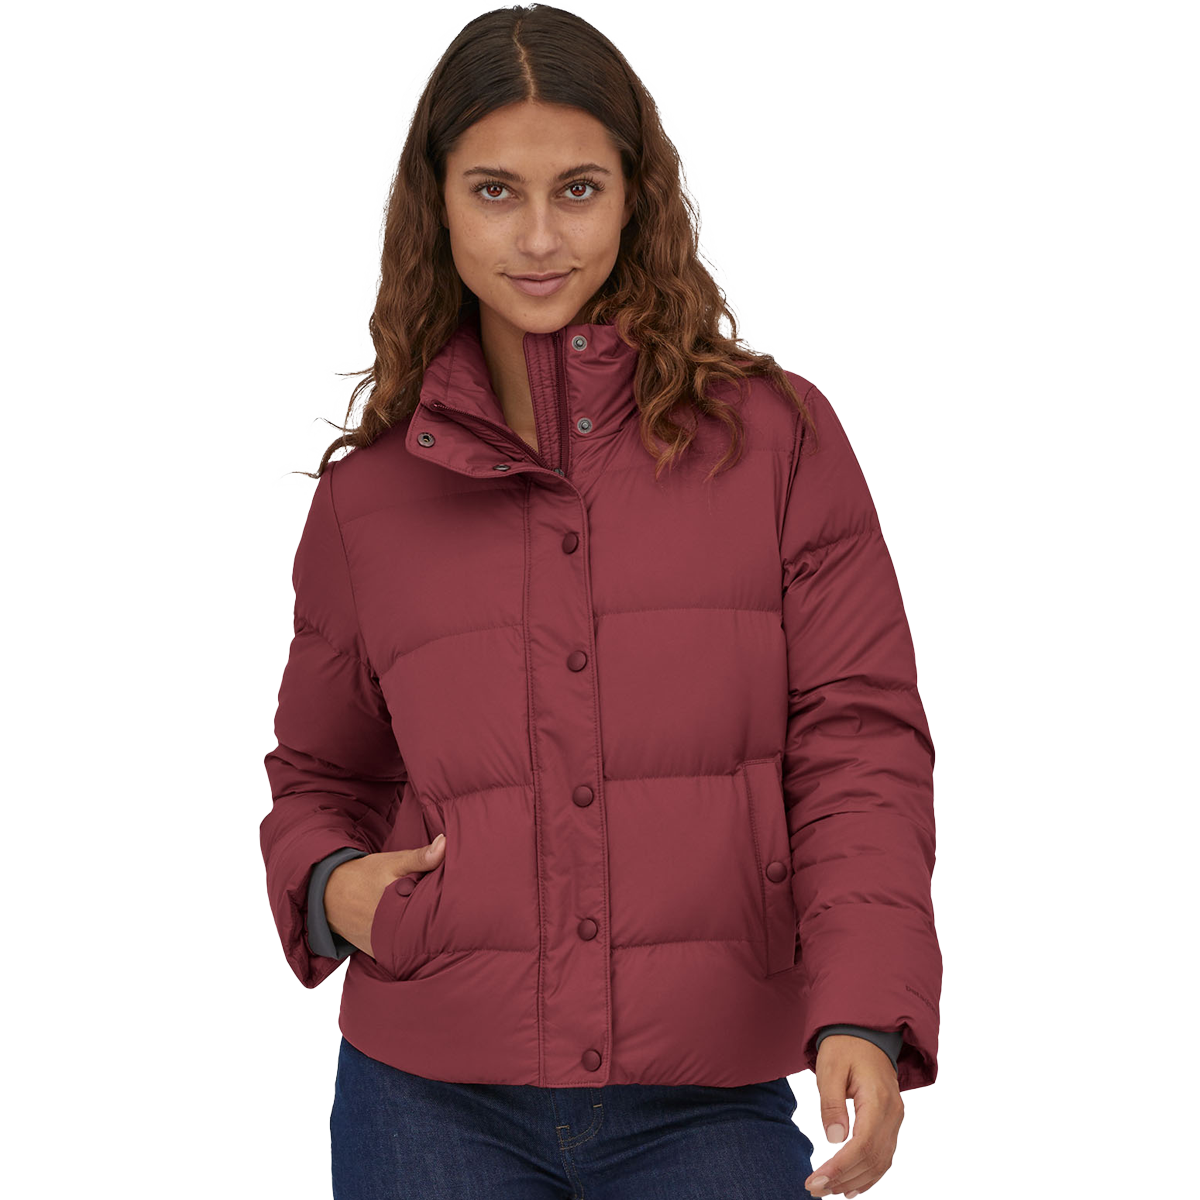 Kuhl Spyfire Parka-Women's-Sangria-Small, Women's Synthetic Insulated  Jackets